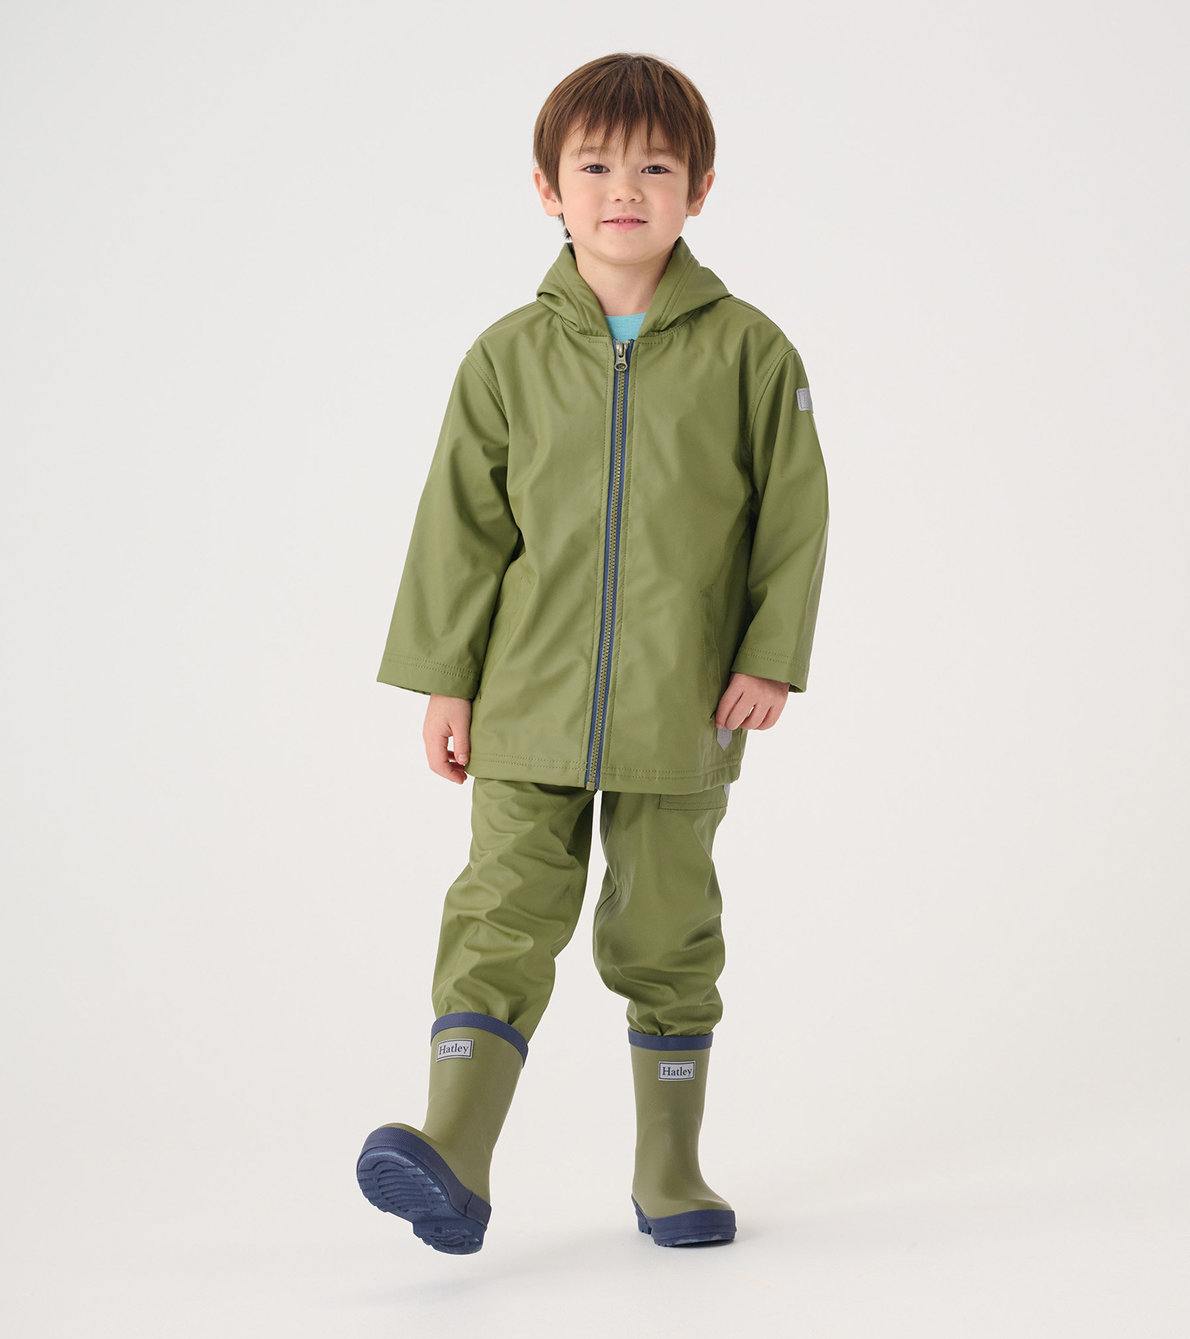 View larger image of Boys Forest Green Zip-Up Rain Jacket